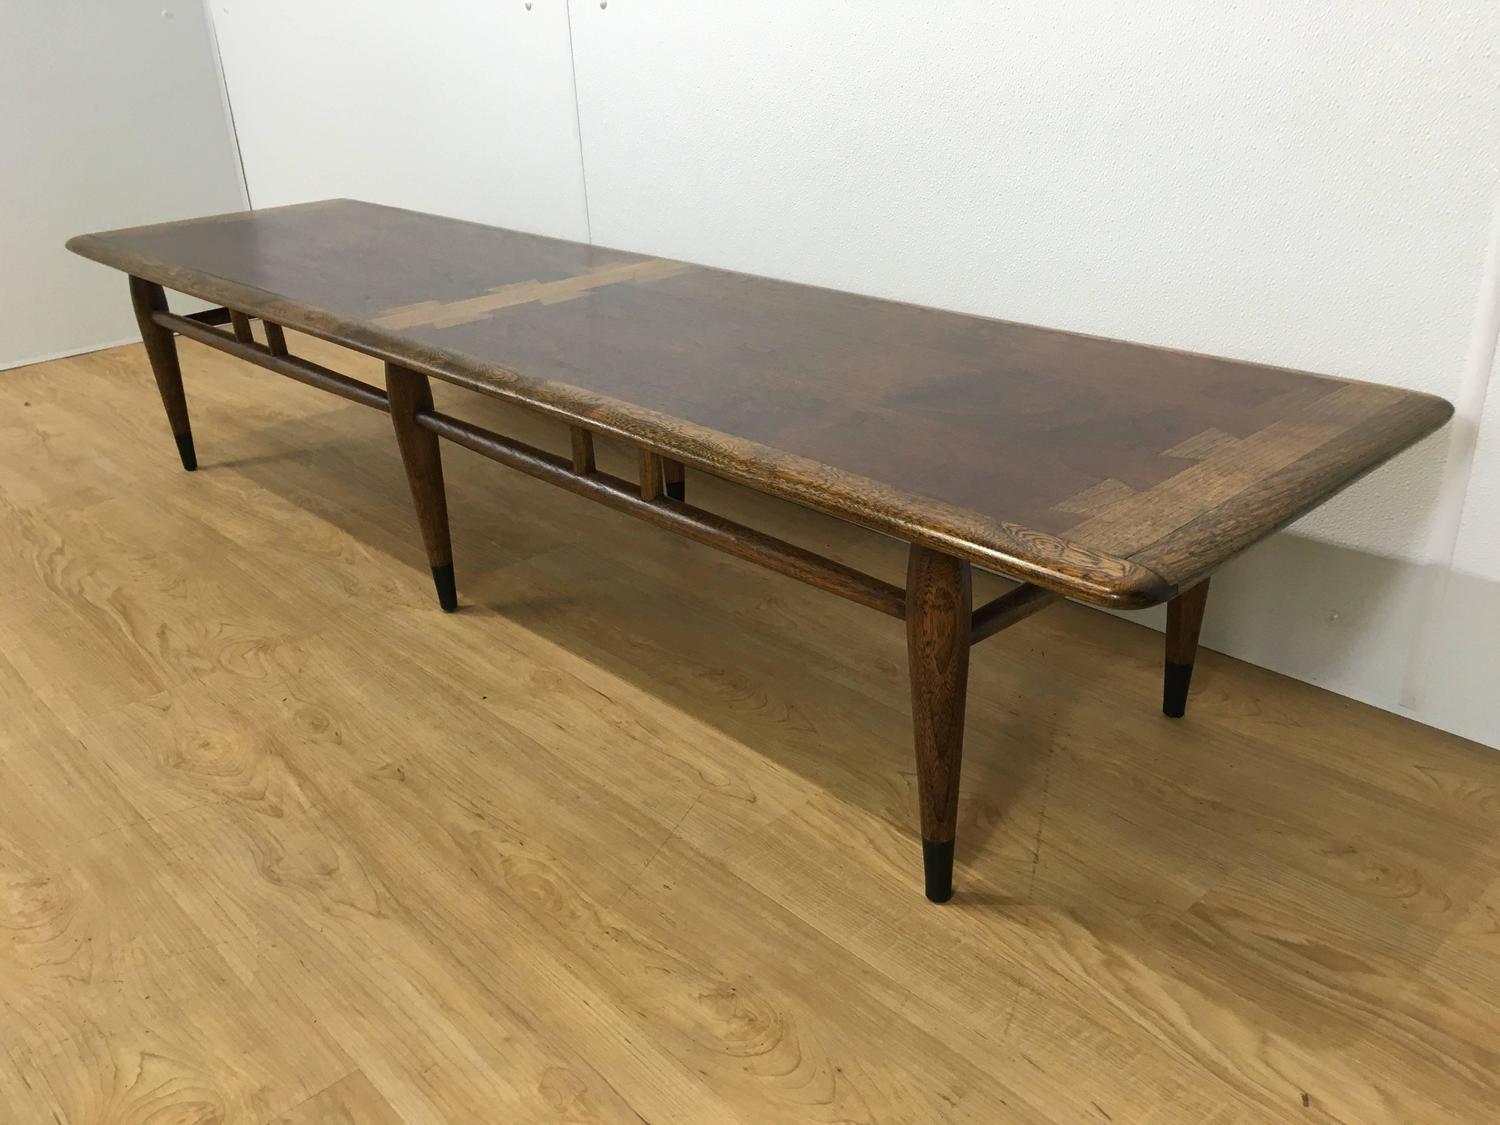 Extra-Long Lane Dovetail Coffee Table For Sale at 1stdibs